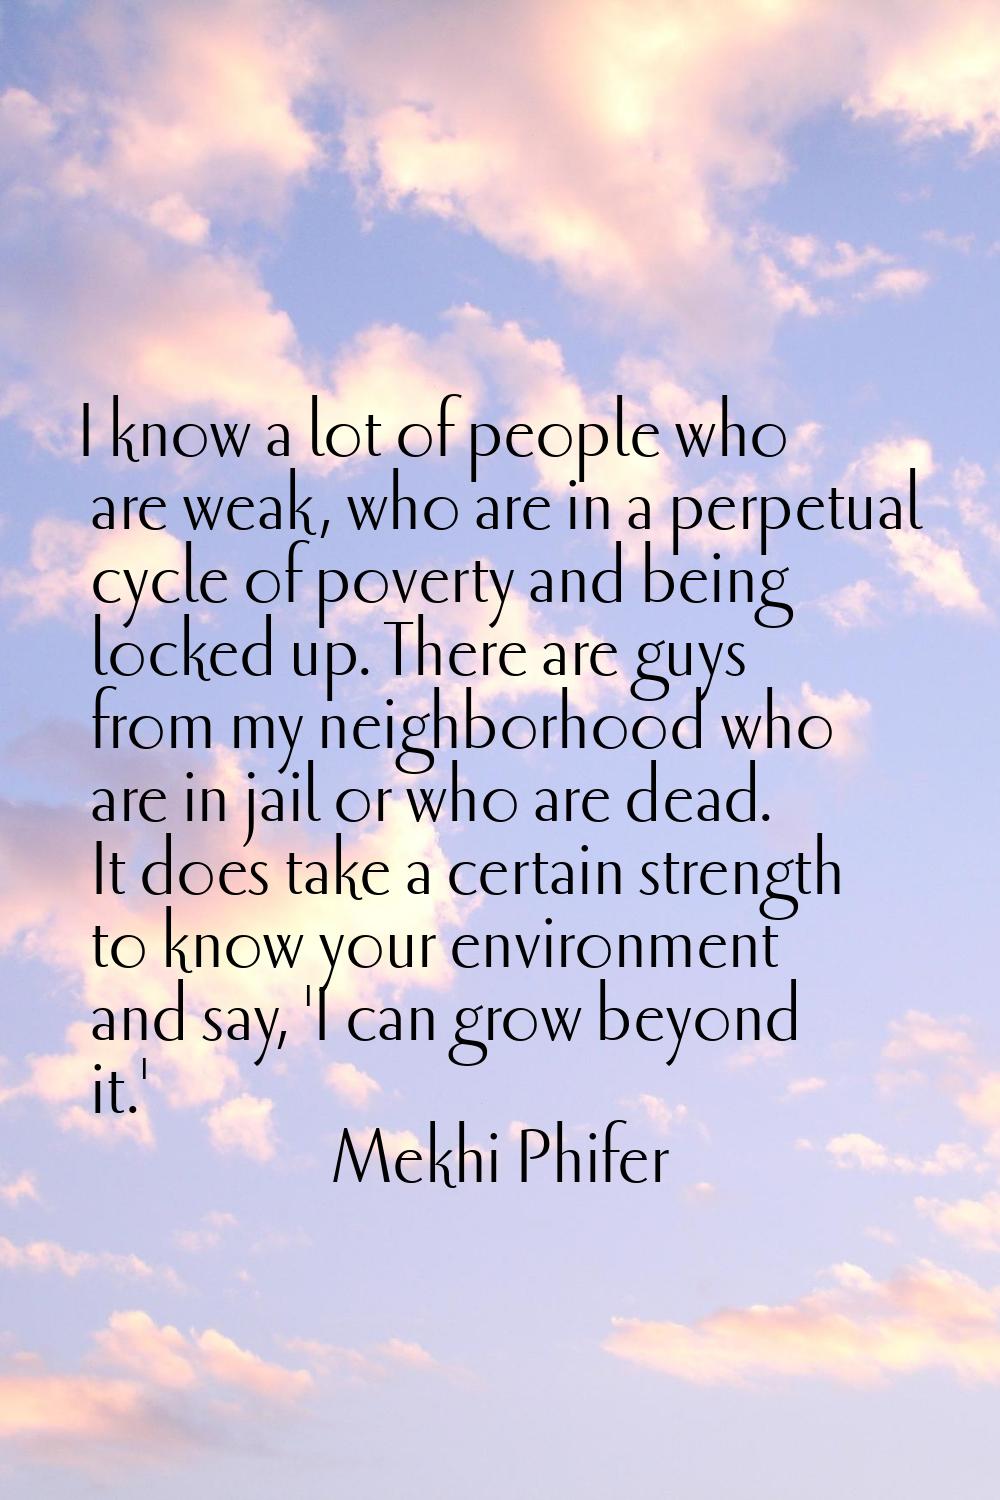 I know a lot of people who are weak, who are in a perpetual cycle of poverty and being locked up. T